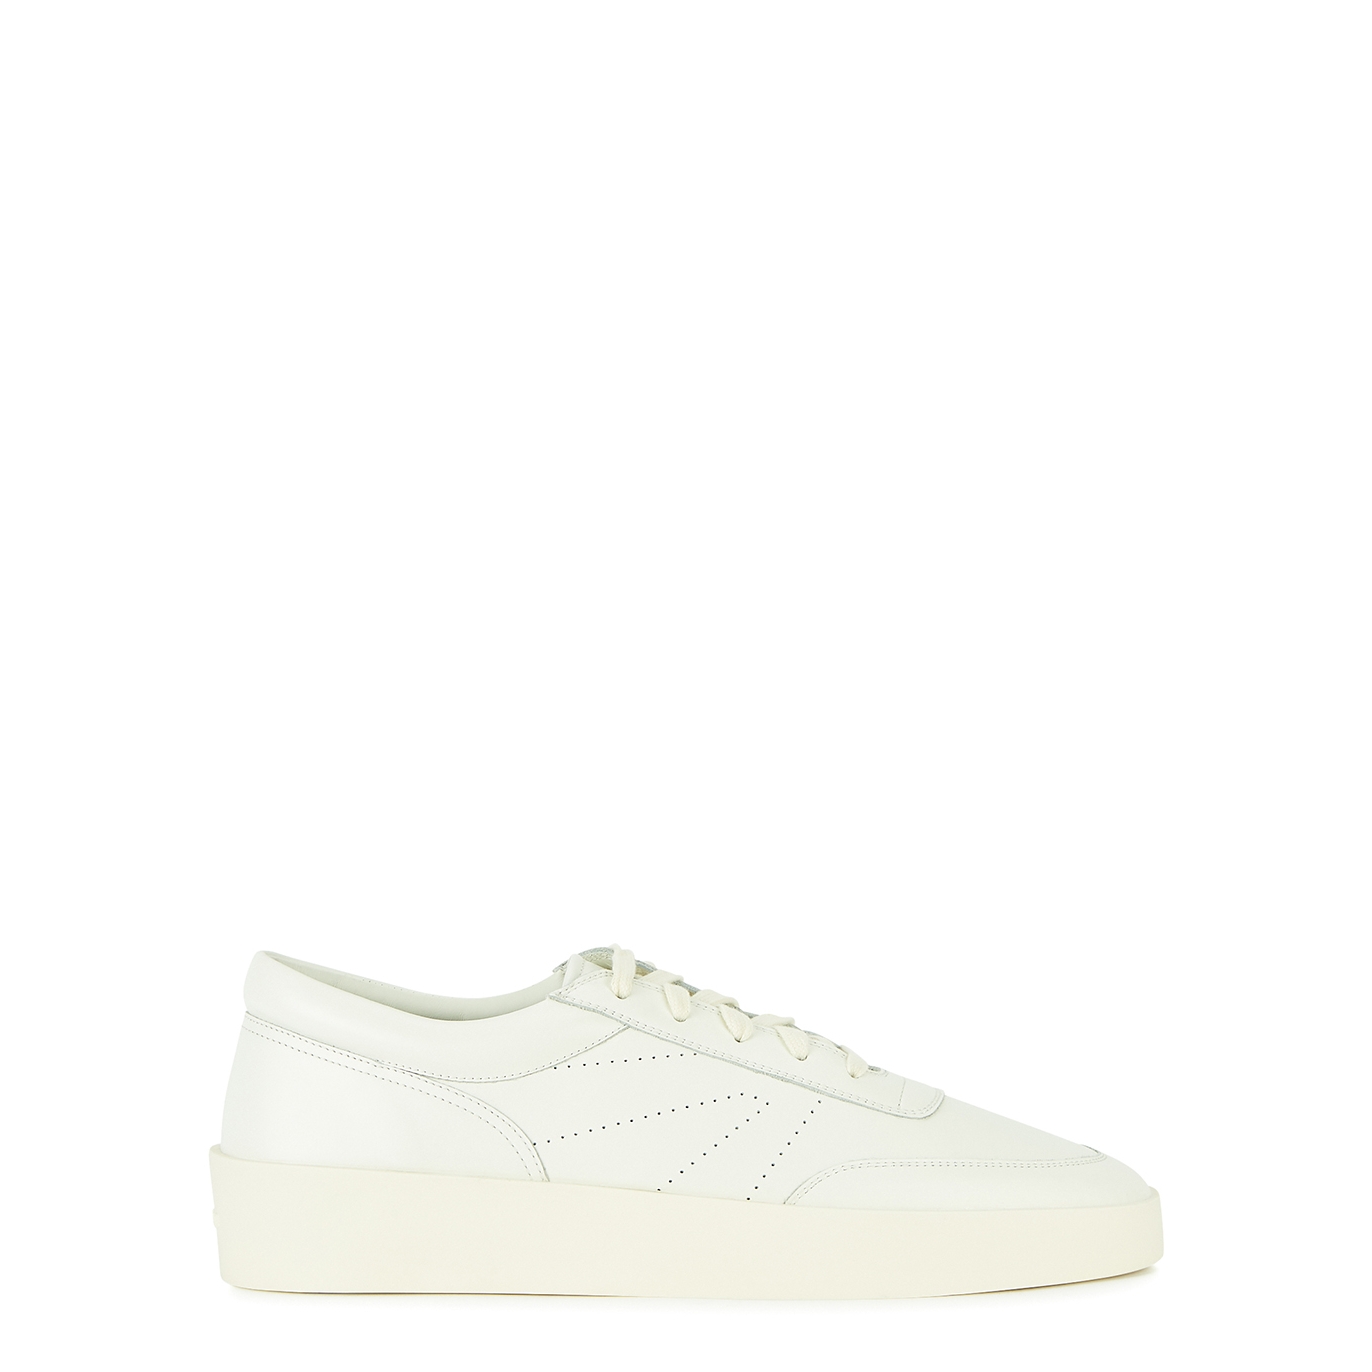 Fear Of God White Leather Sneakers - Cream - 6